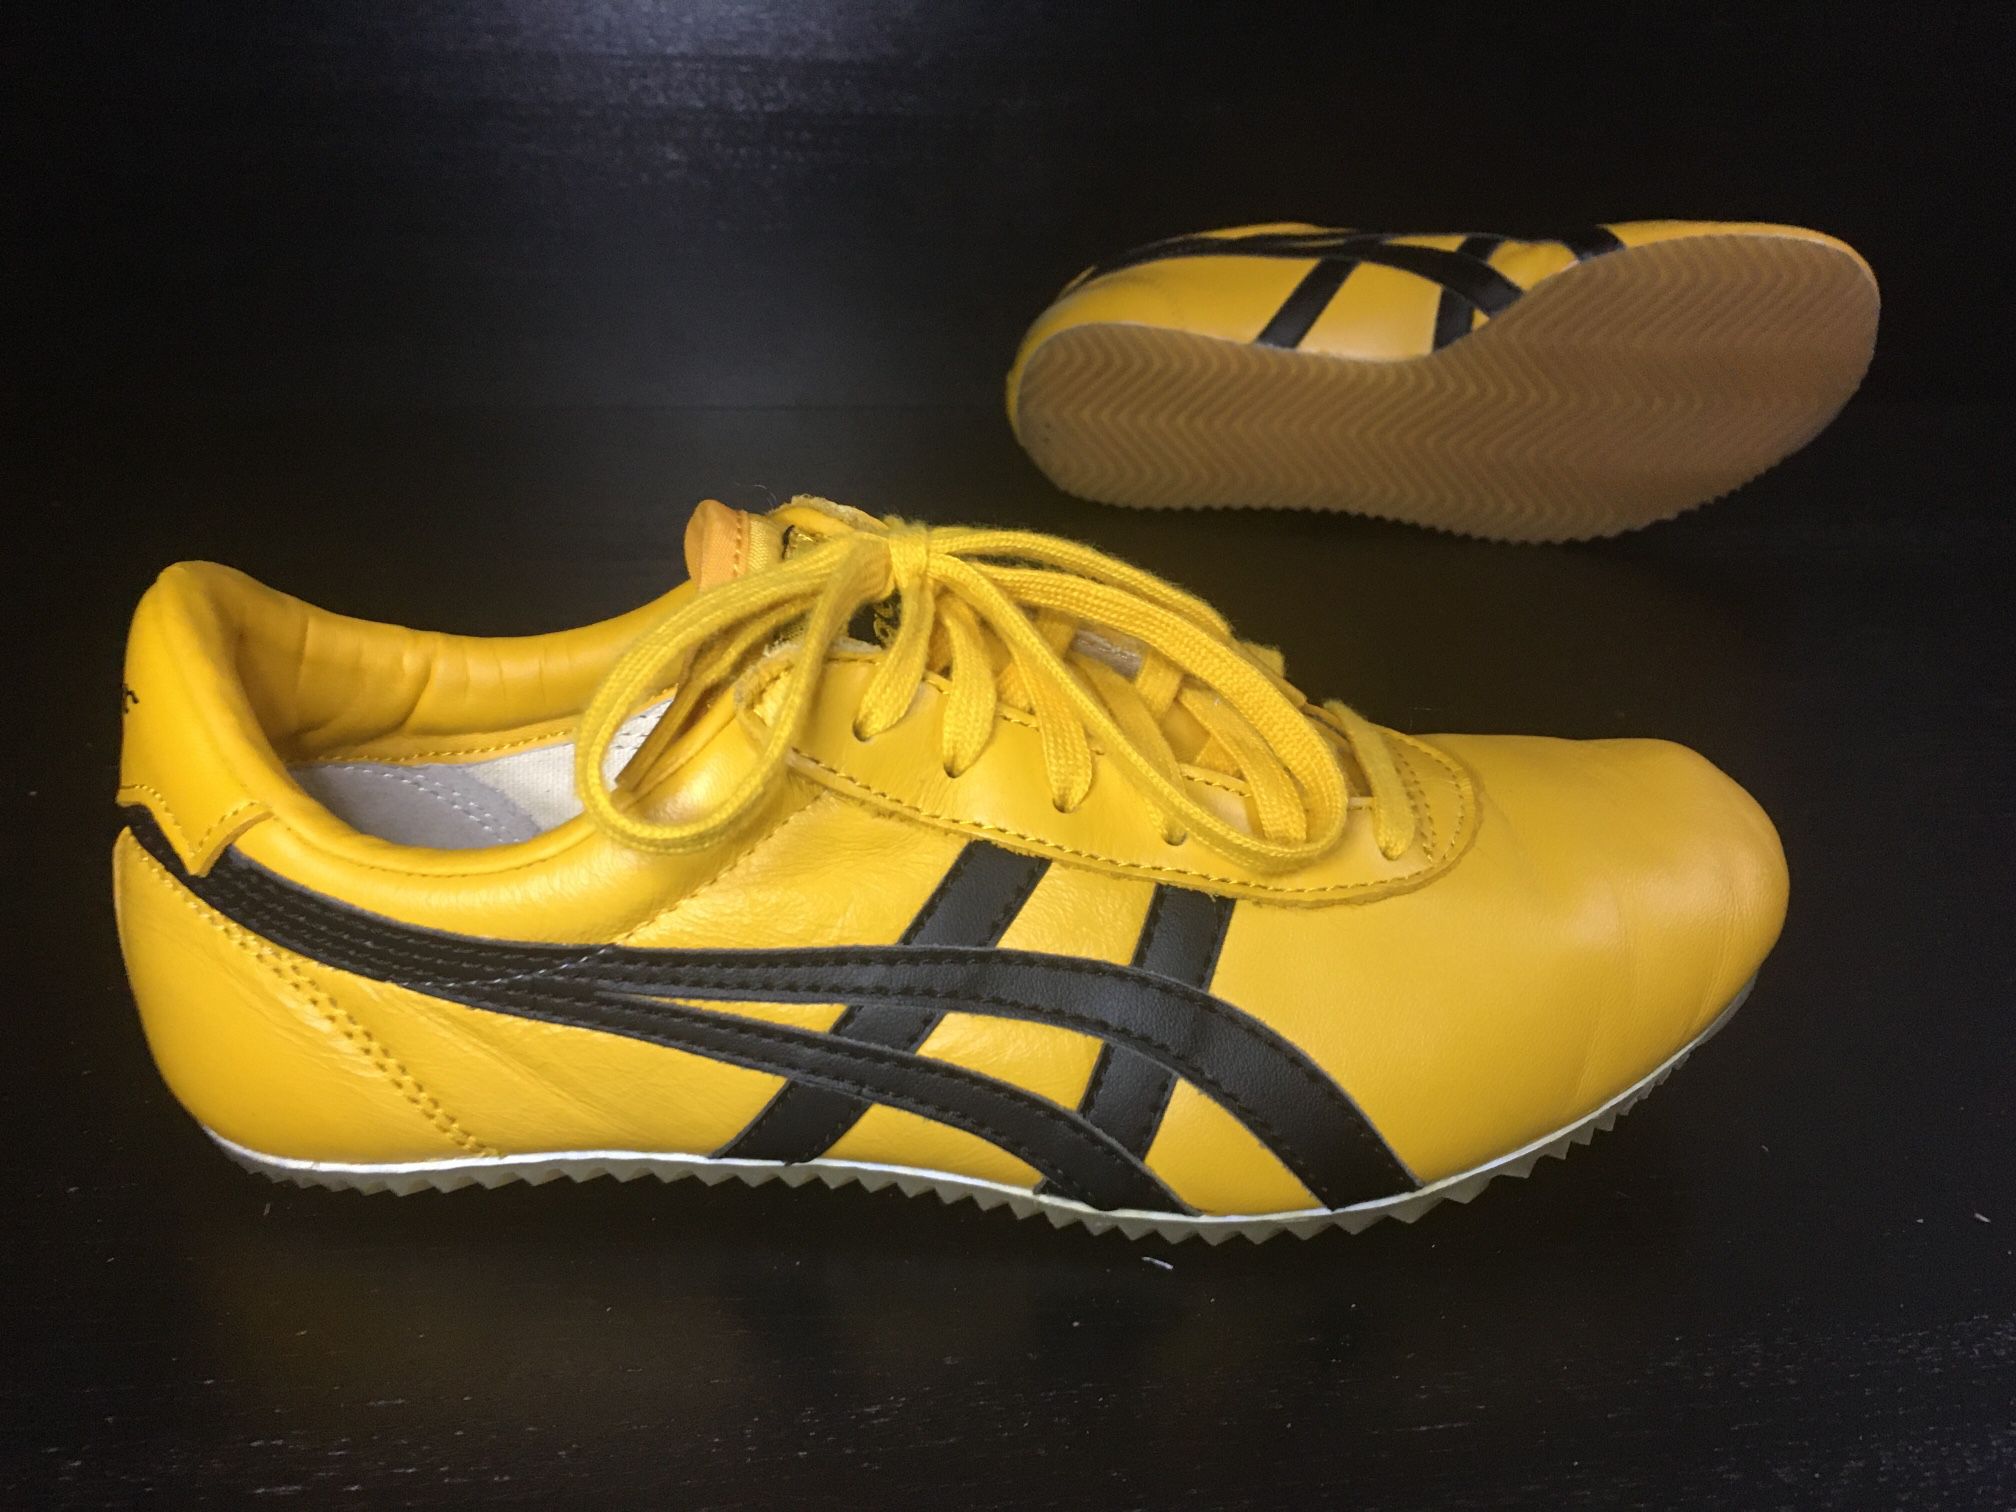 RARE Onitsuka Tiger Tai Chi ASICS Size MEN US 5.5 WOMEN 7 Yellow Bill for Sale Diego, CA - OfferUp